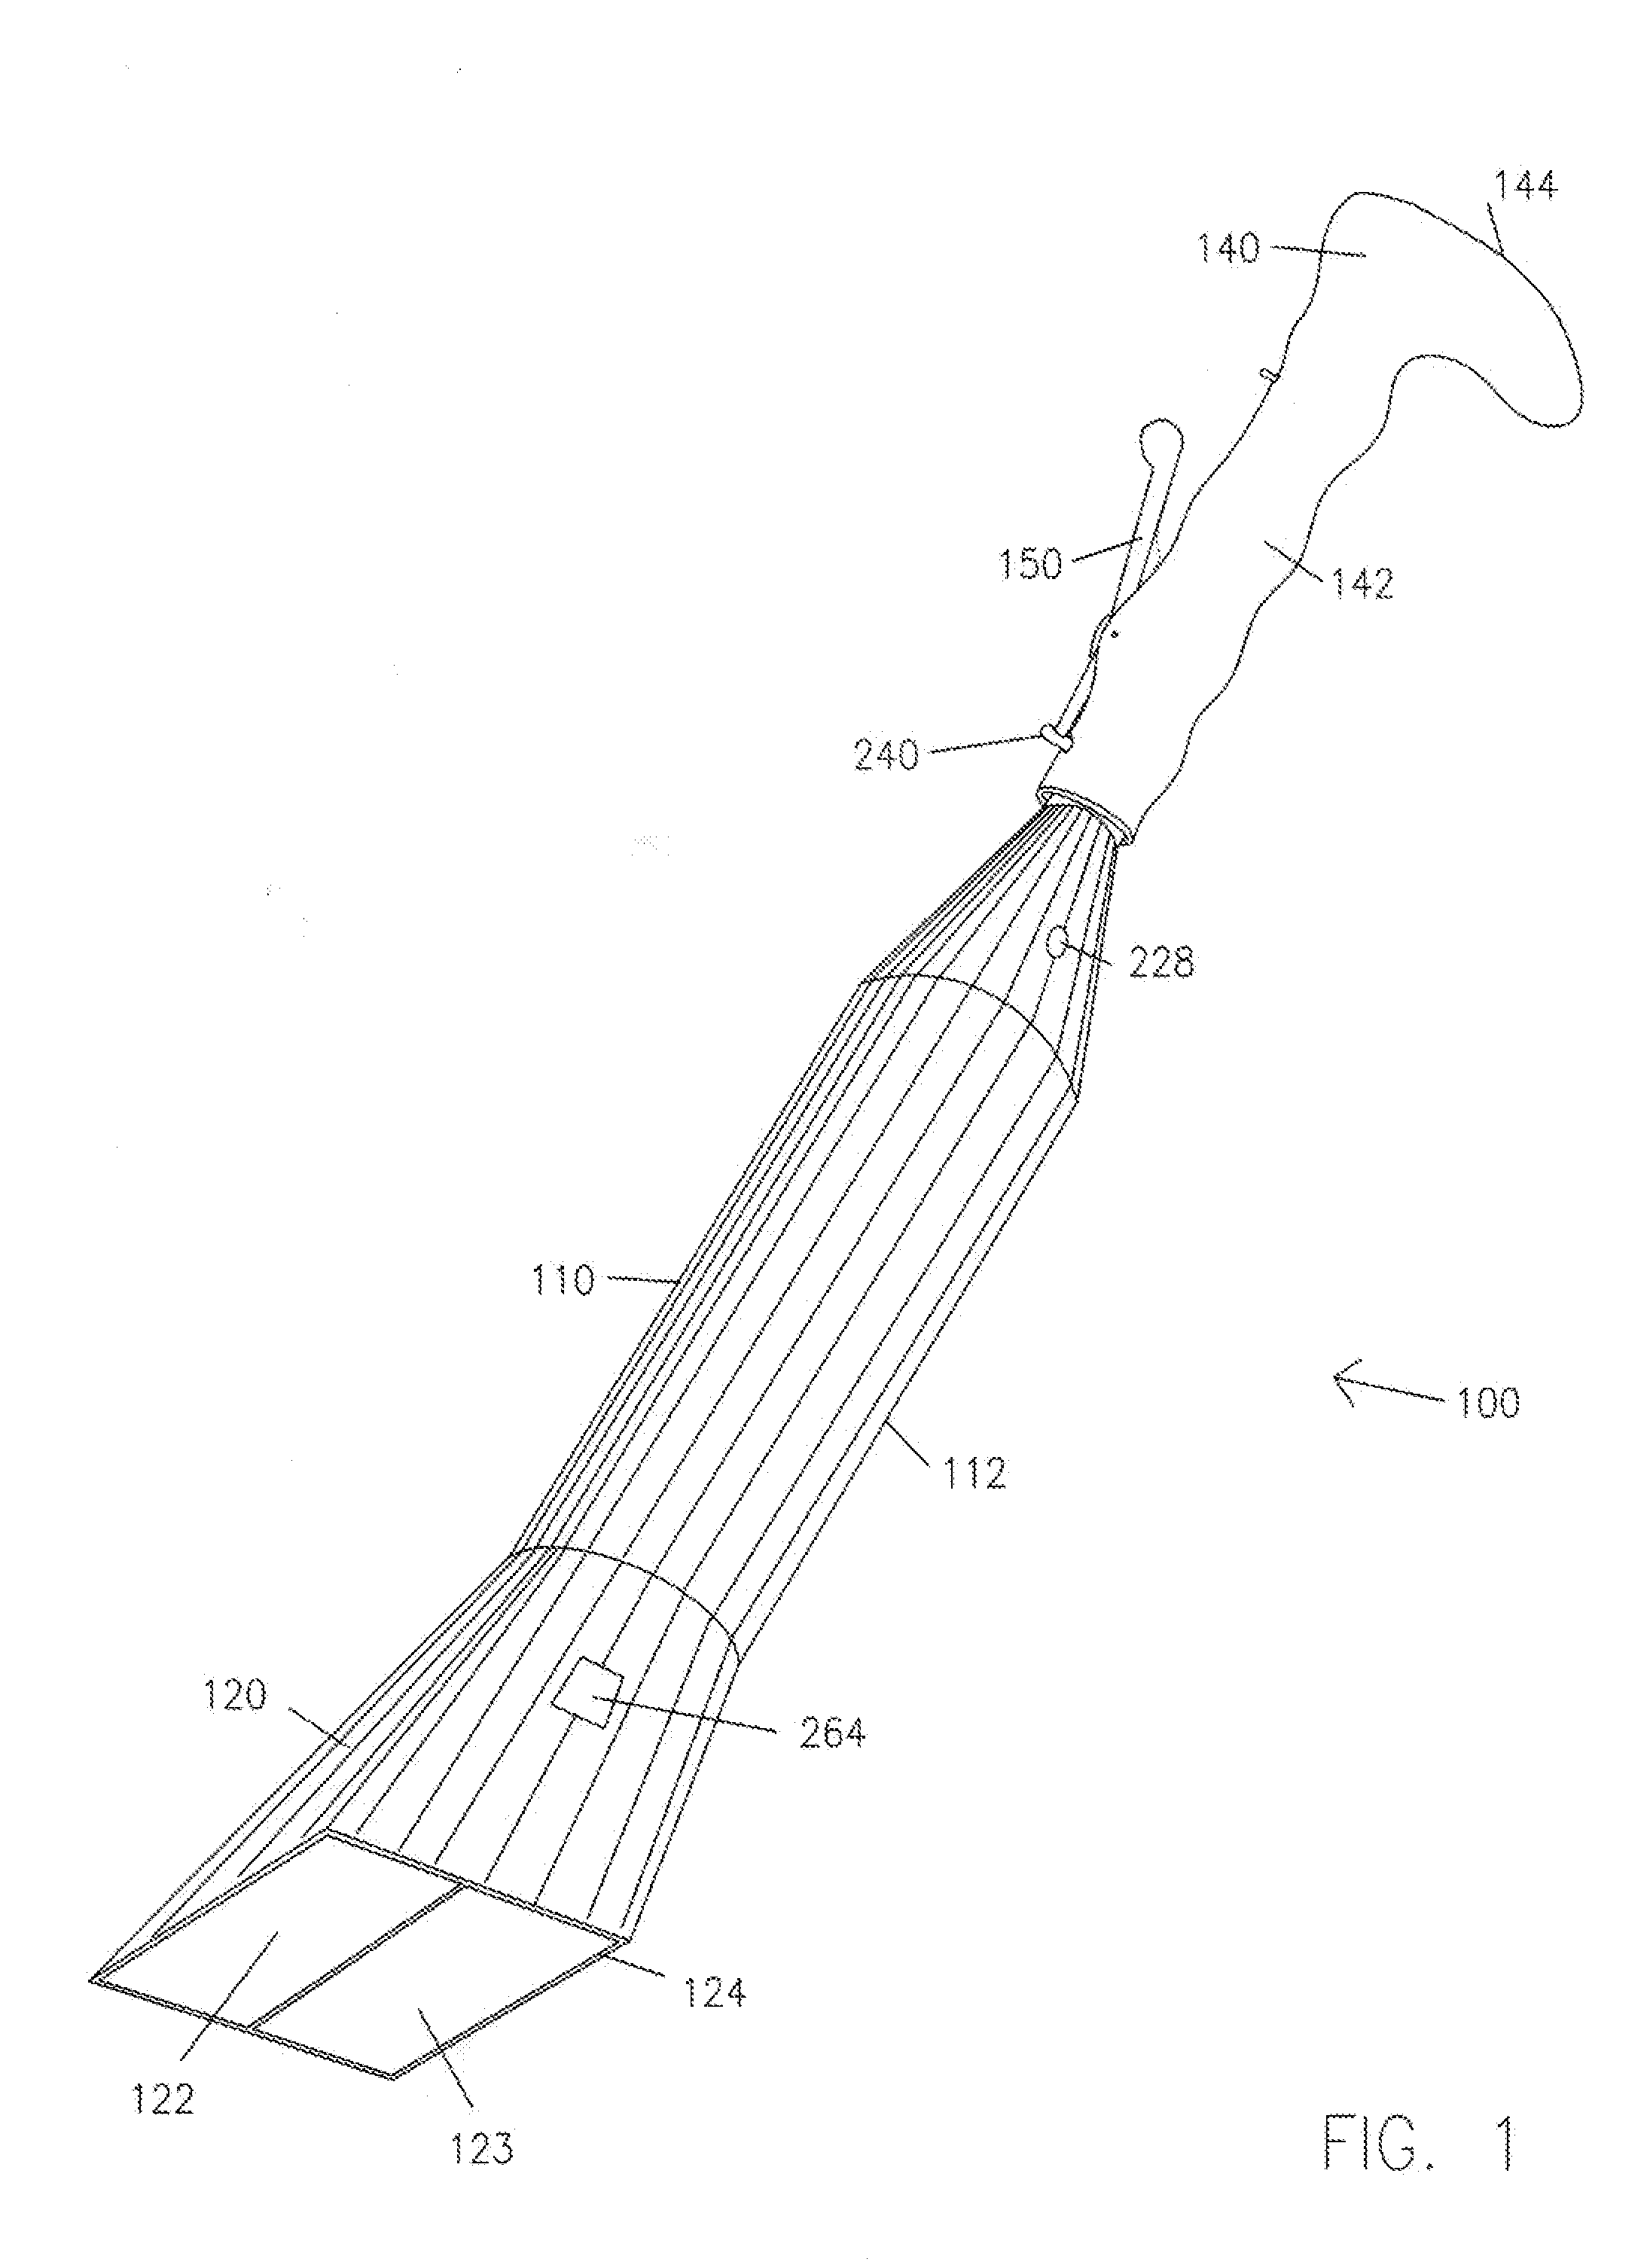 Pet waste and refuse collection system and method